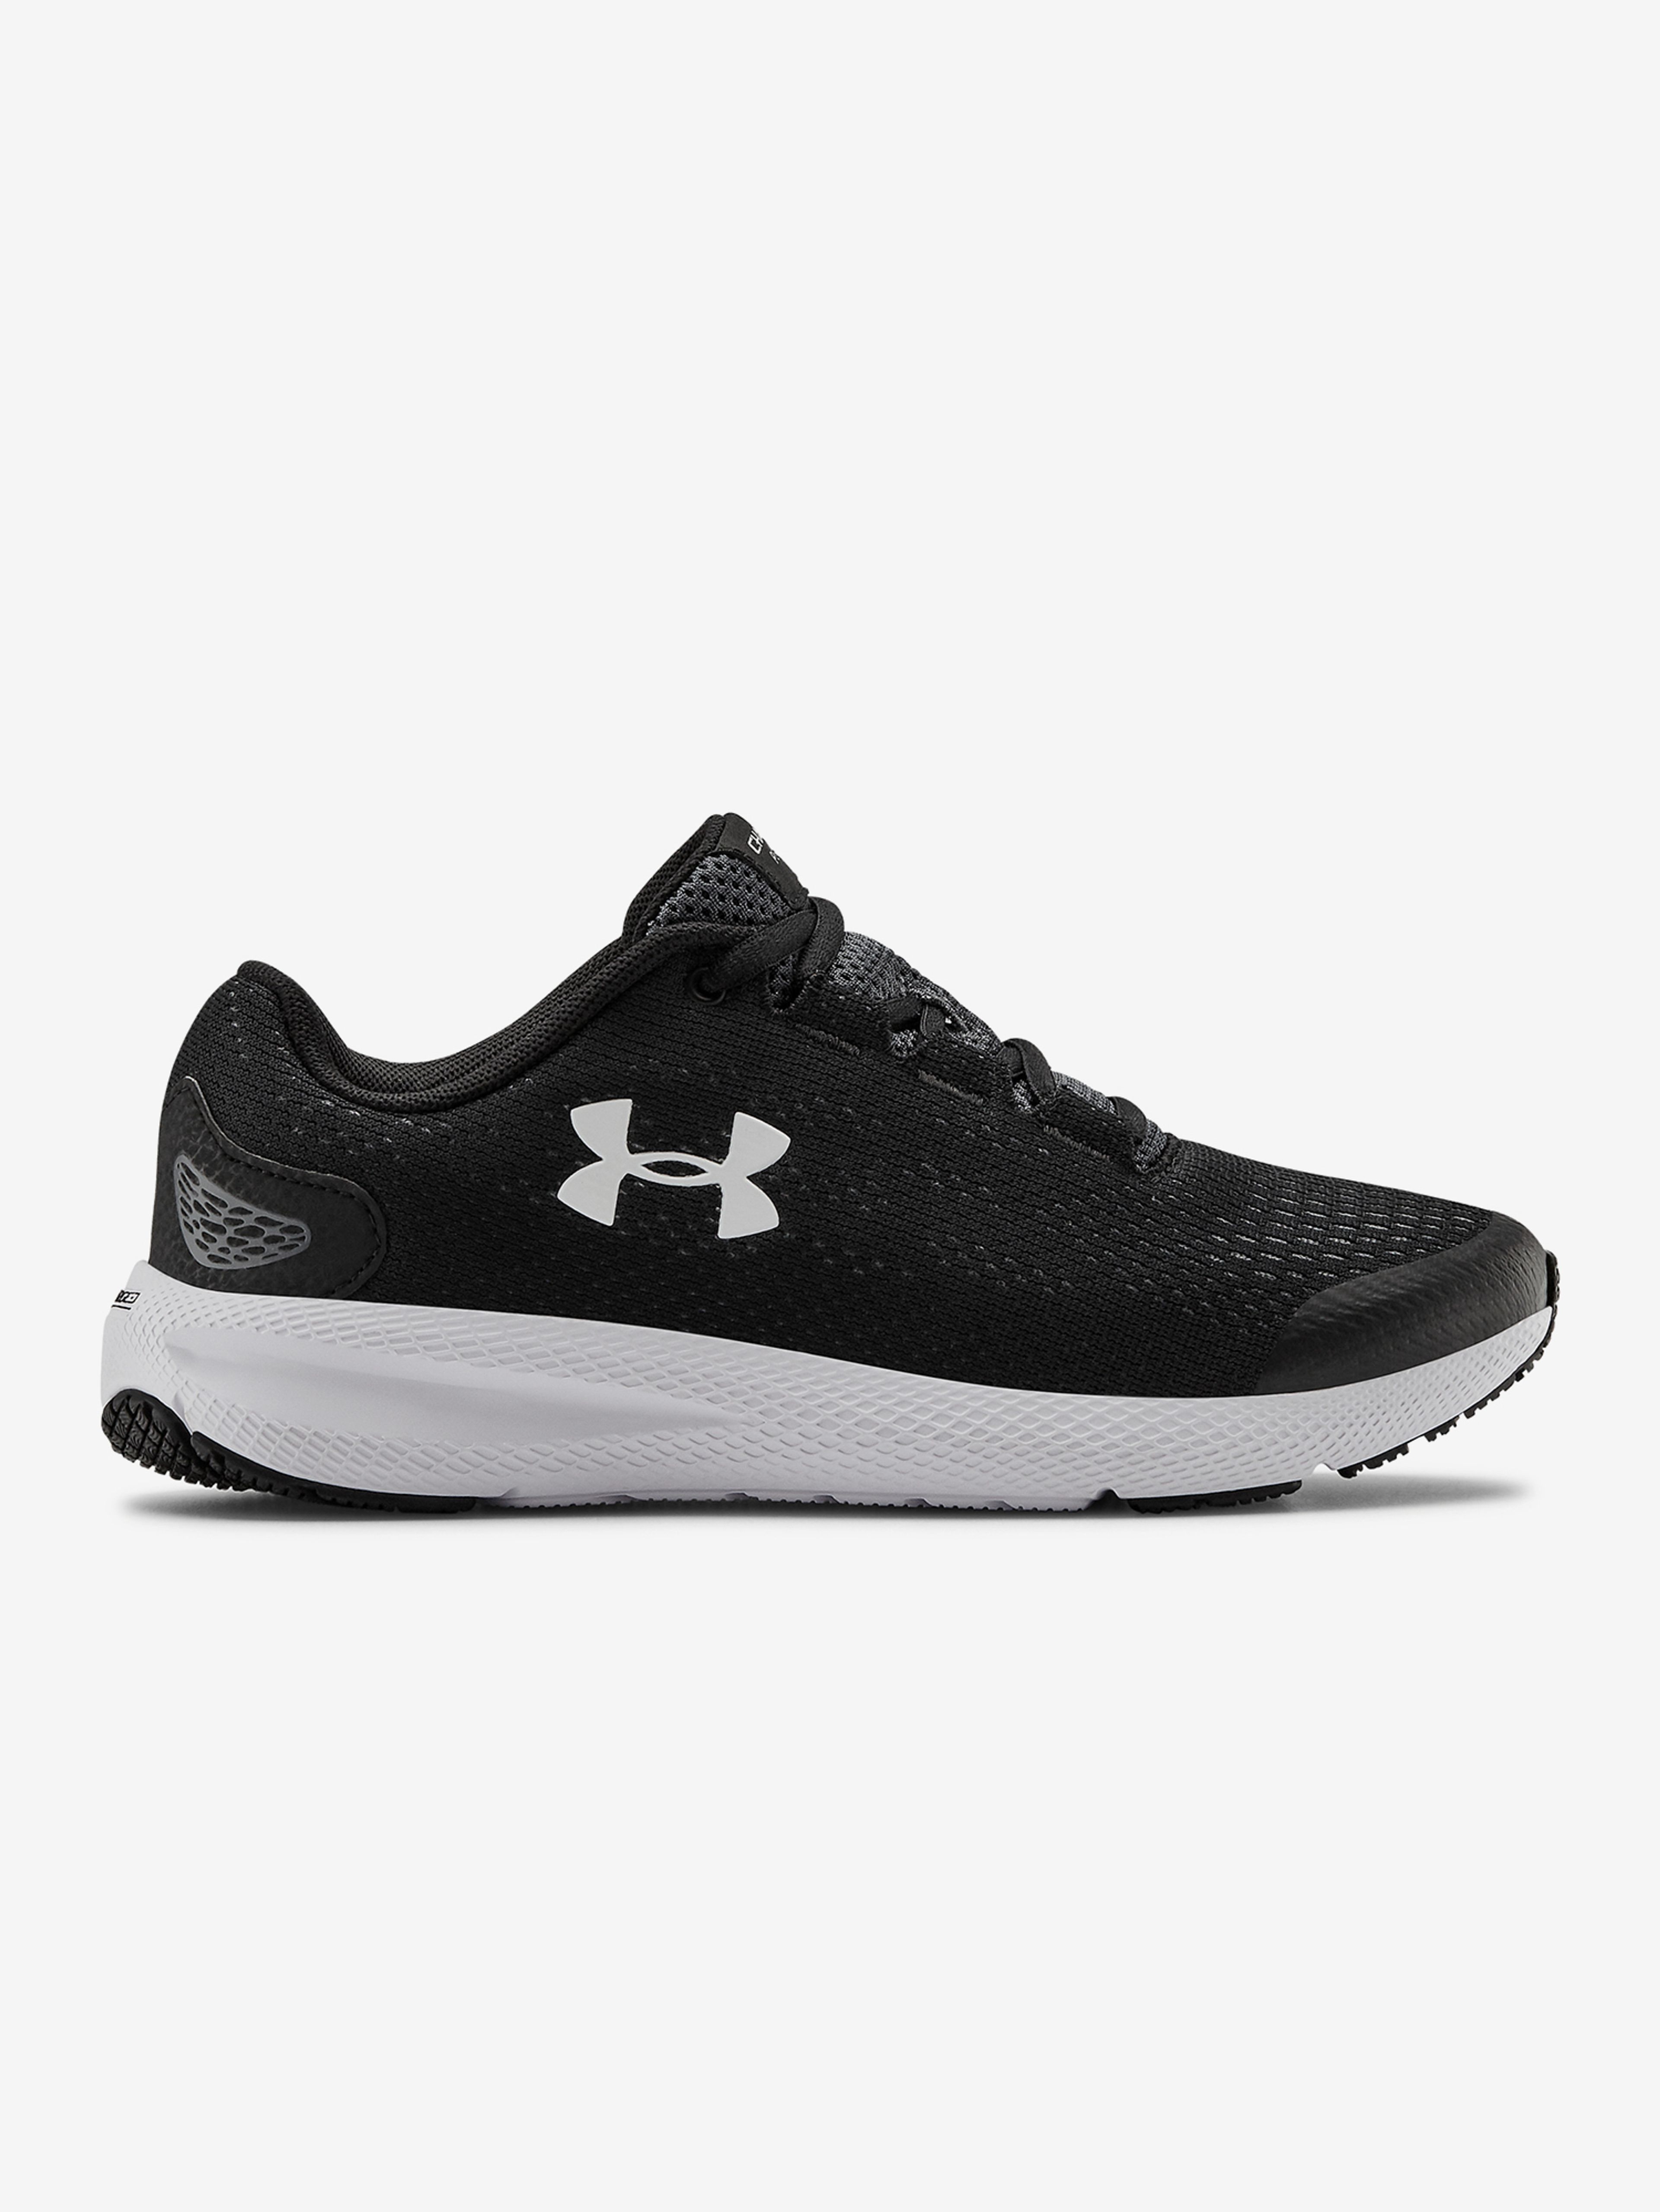 Boty Under Armour Gs Charged Pursuit 2